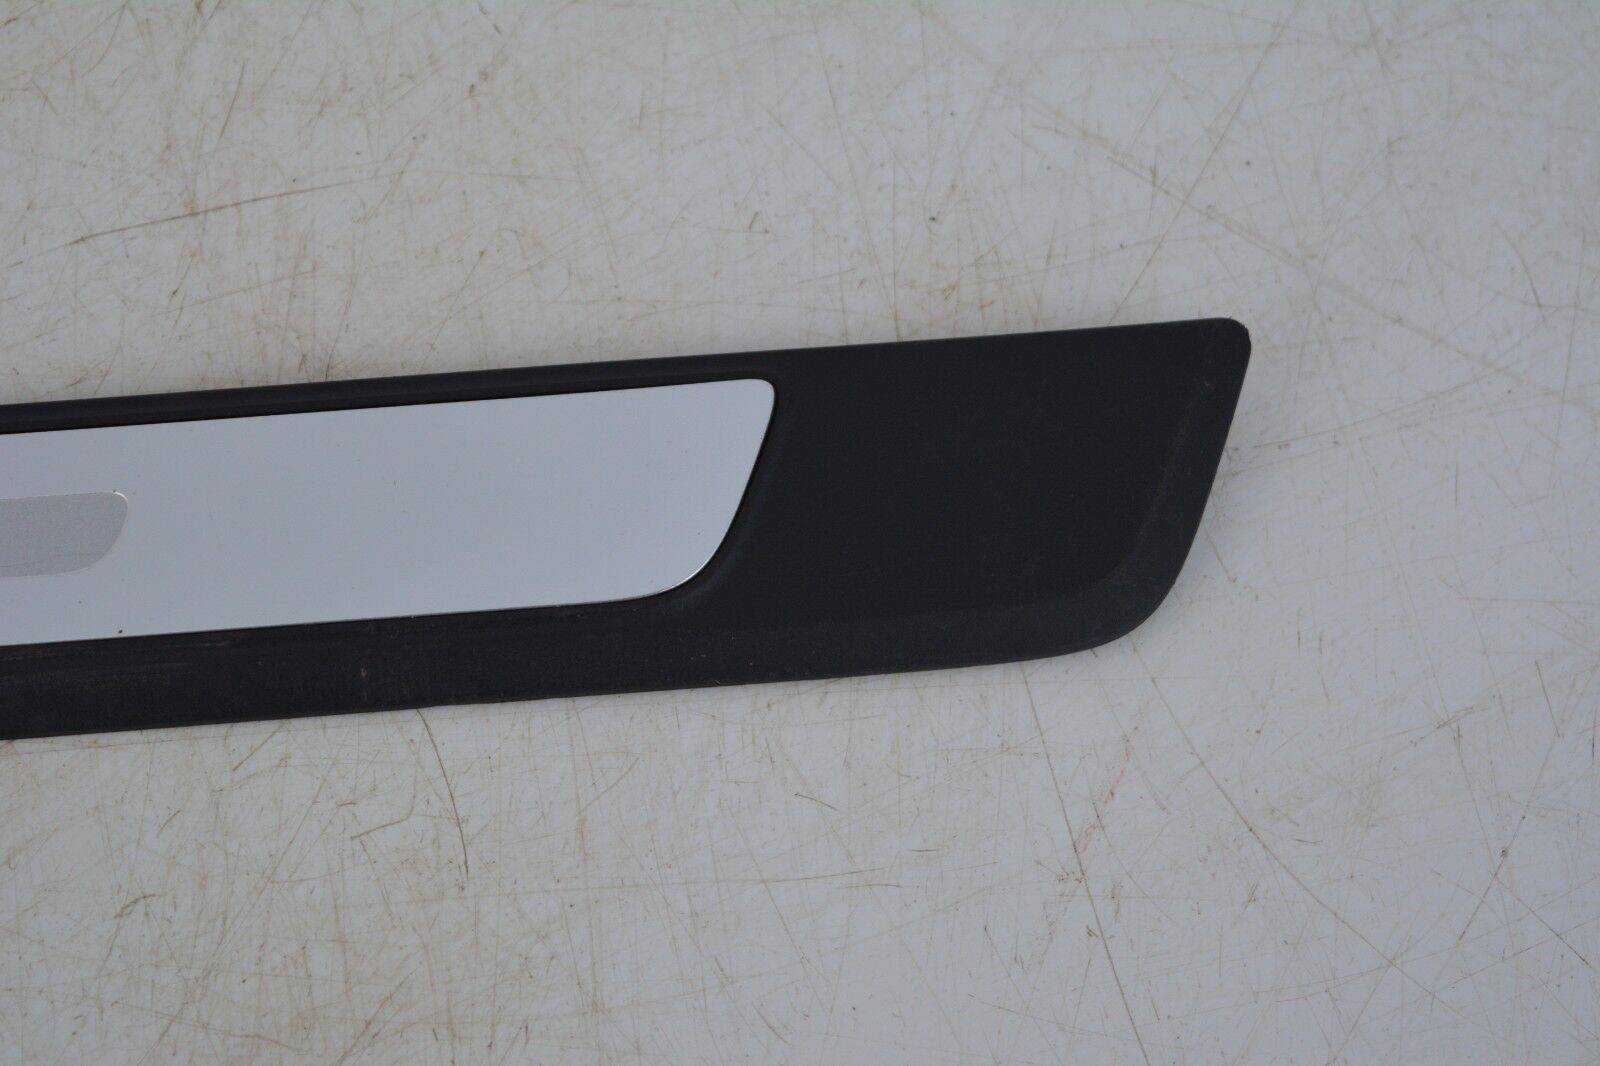 AUDI-A4-DOOR-SILL-ENTRY-TRIM-FRONT-LEFT-2015-2018-175367529874-2